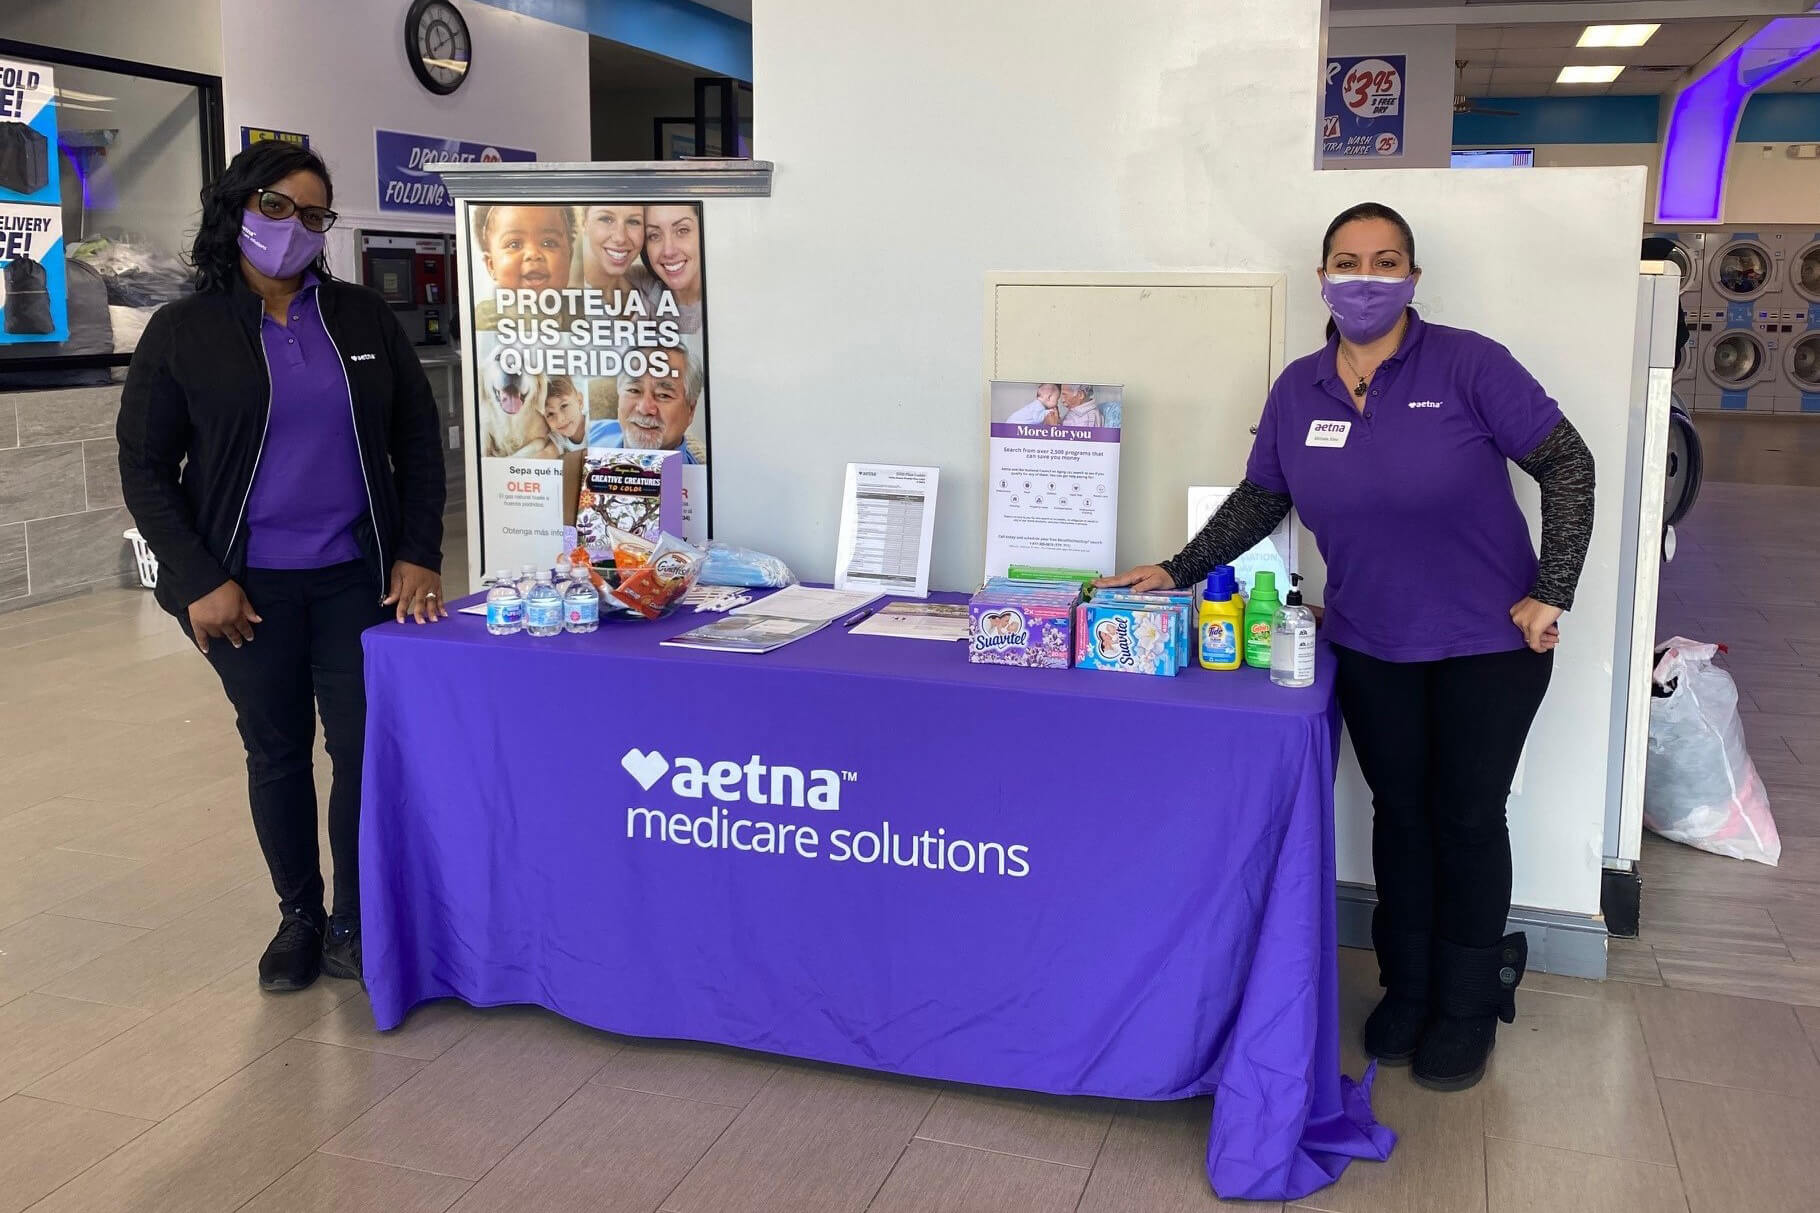 Two masked Aetna representatives provide free laundry products from a table stocked with products.